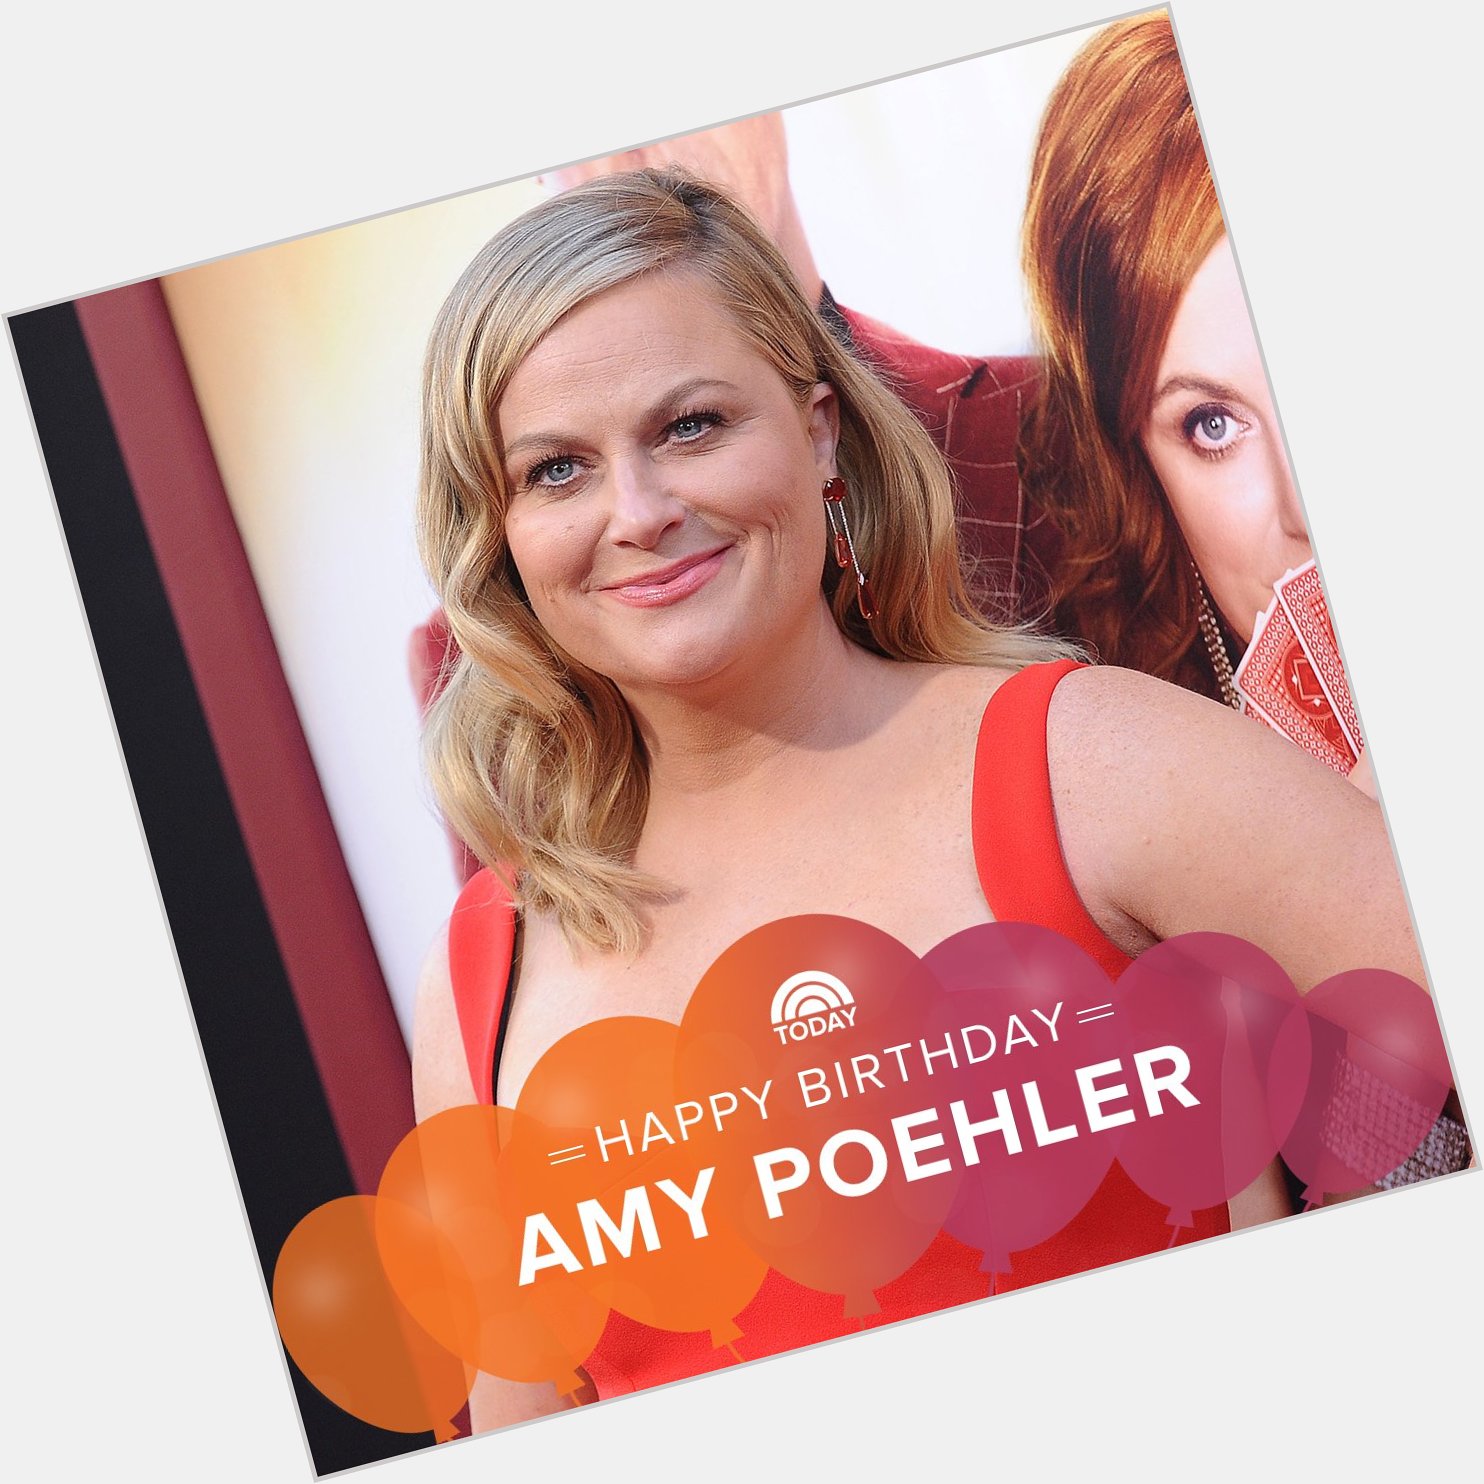 Happy birthday to one of our favorite ladies, Amy Poehler!  